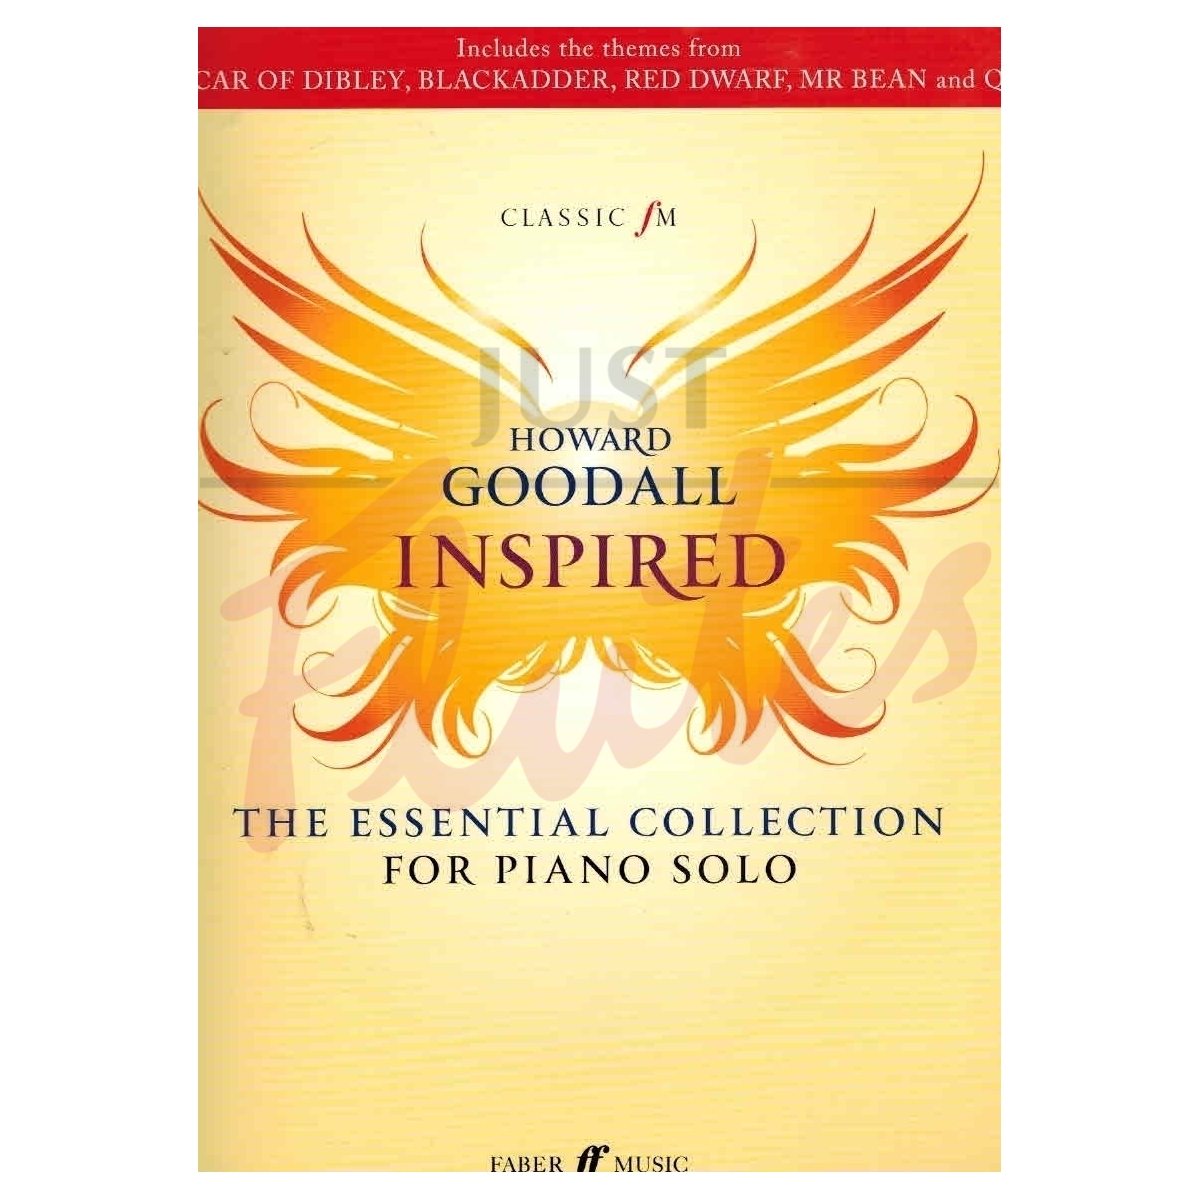 Classic FM Howard Goodall Inspired Collection